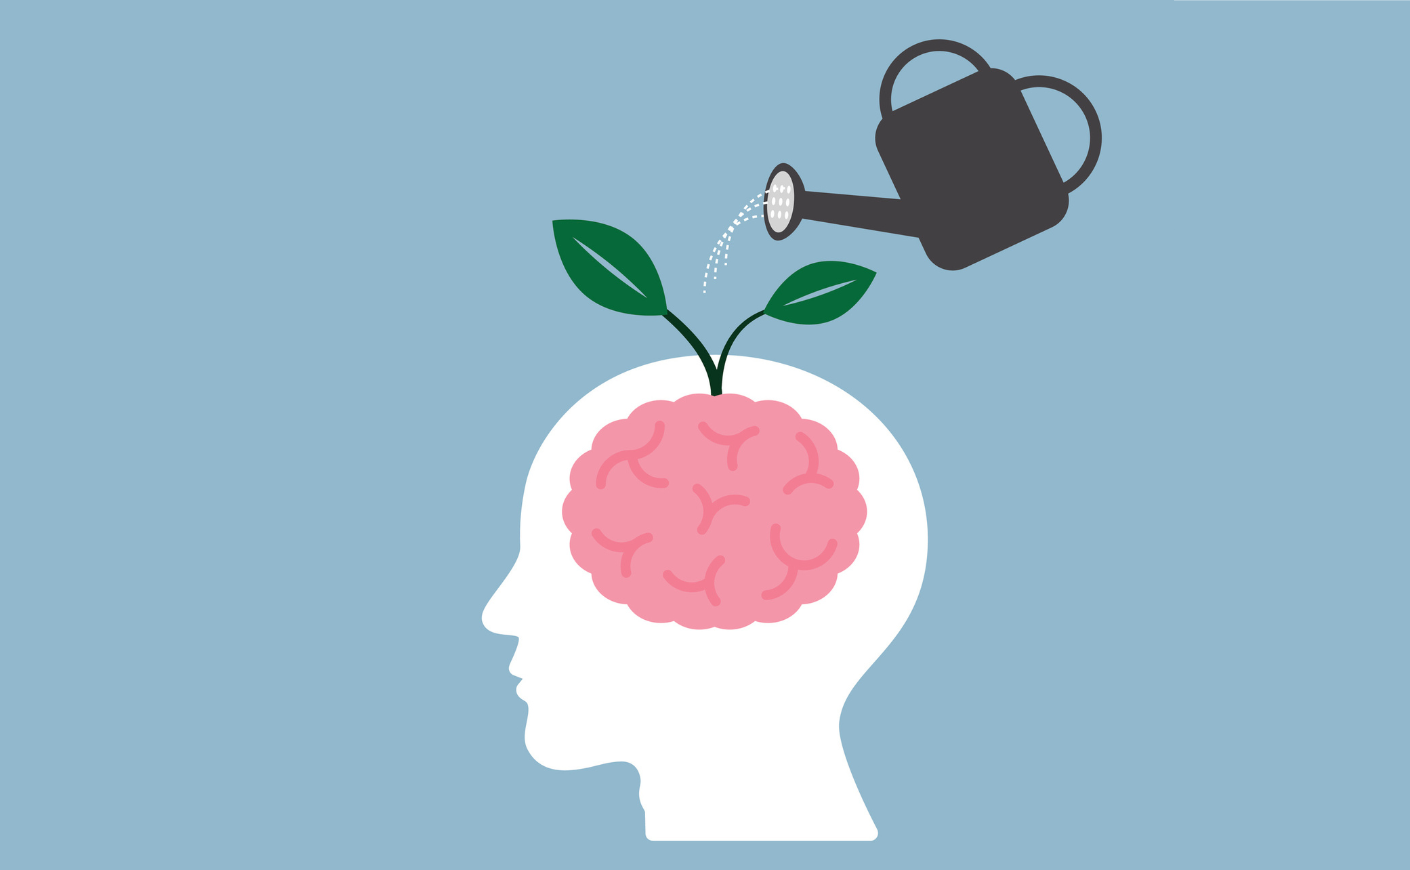 Illustration of a watering can and a brain with a plant growing out of it